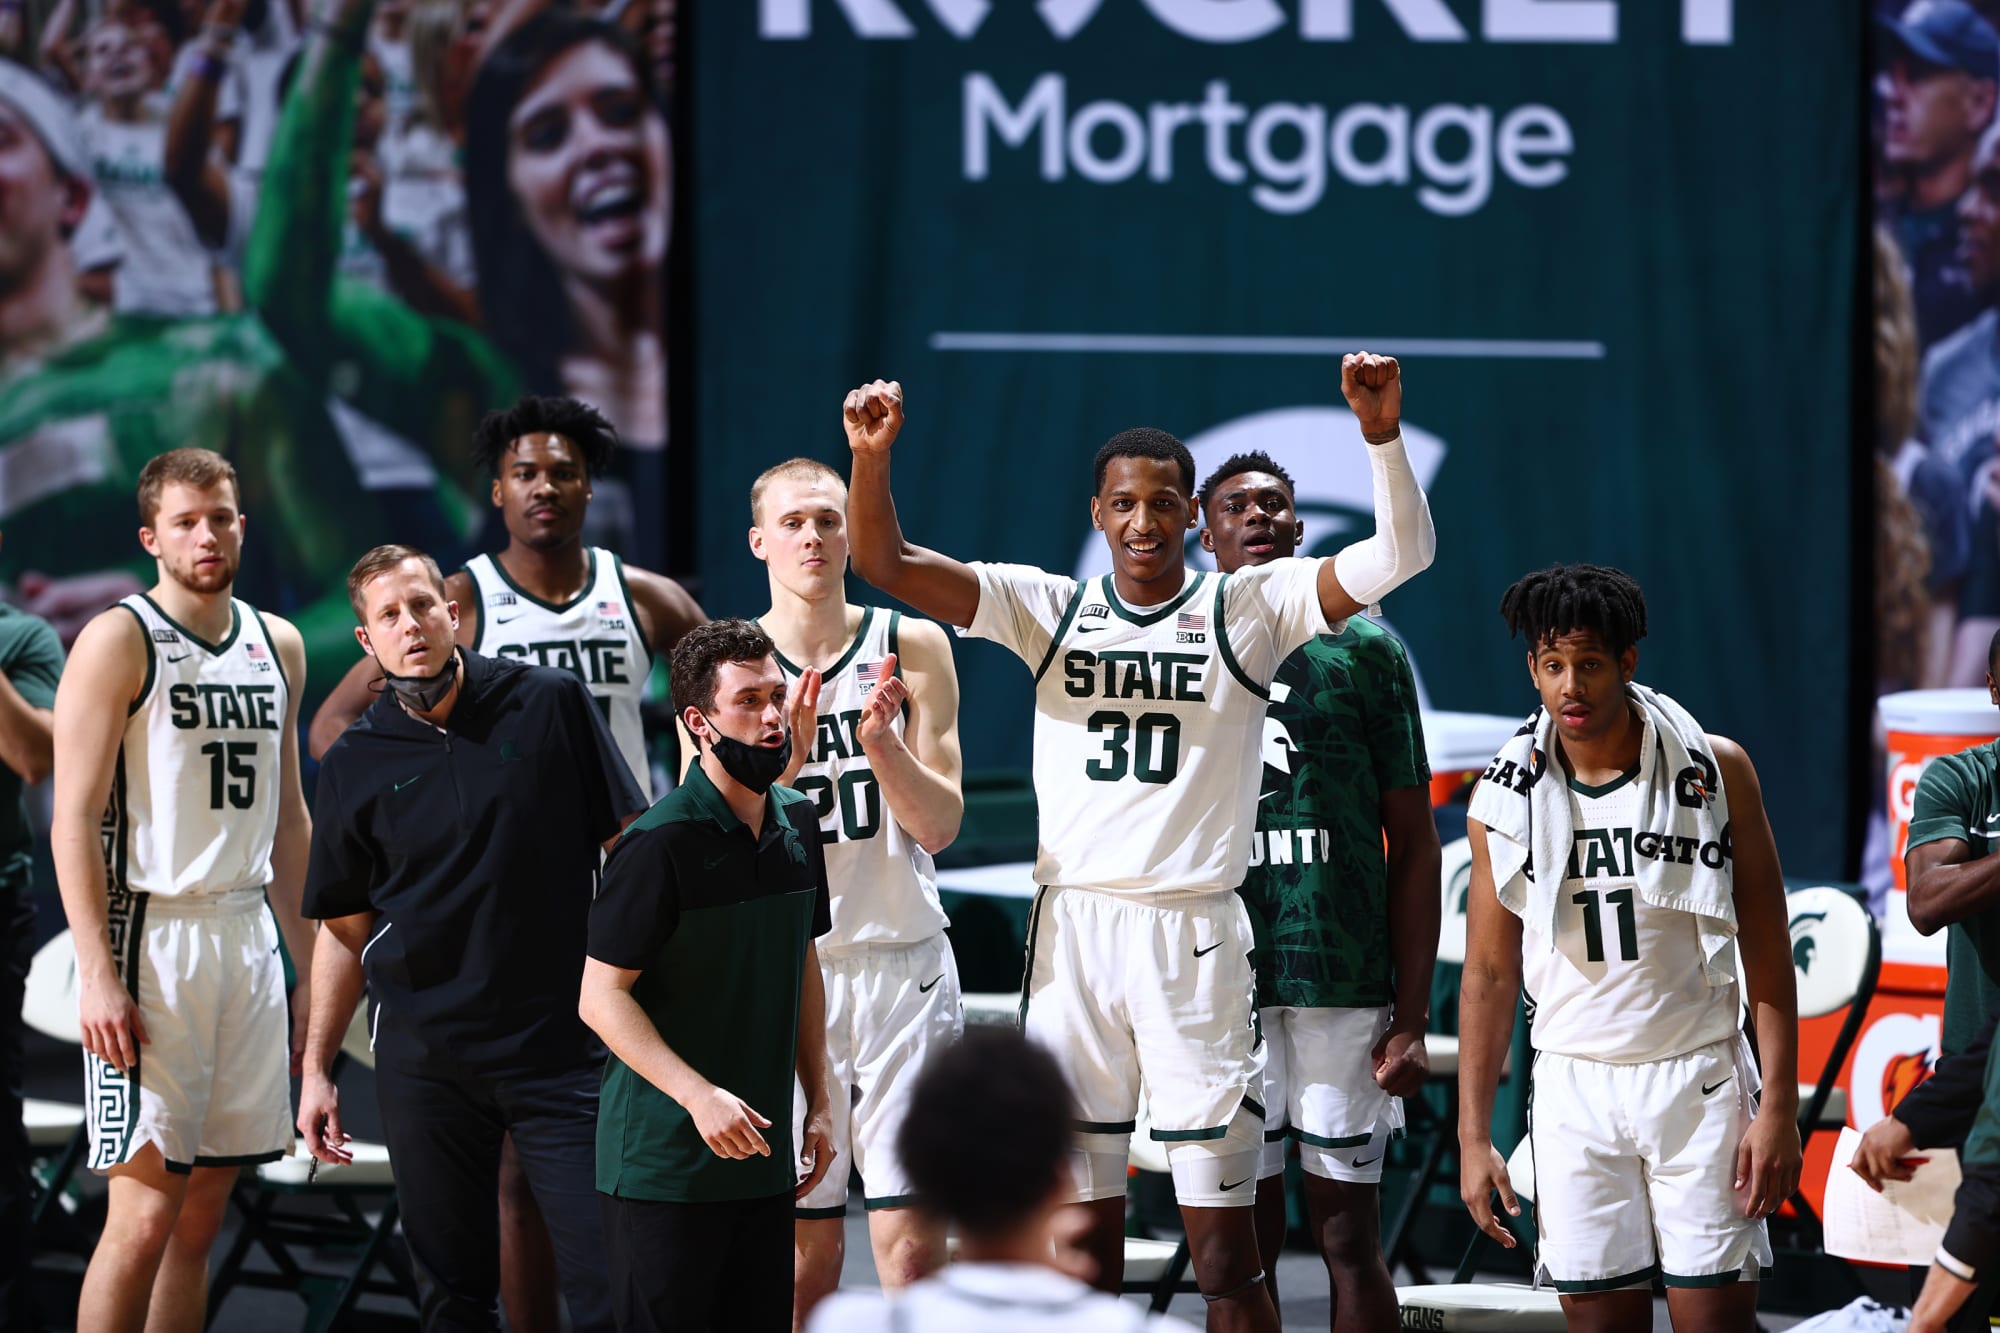 Msu Basketball Schedule 2022 2023 Michigan State Basketball: Possible Opponents For Non-Con Play In 2021-22